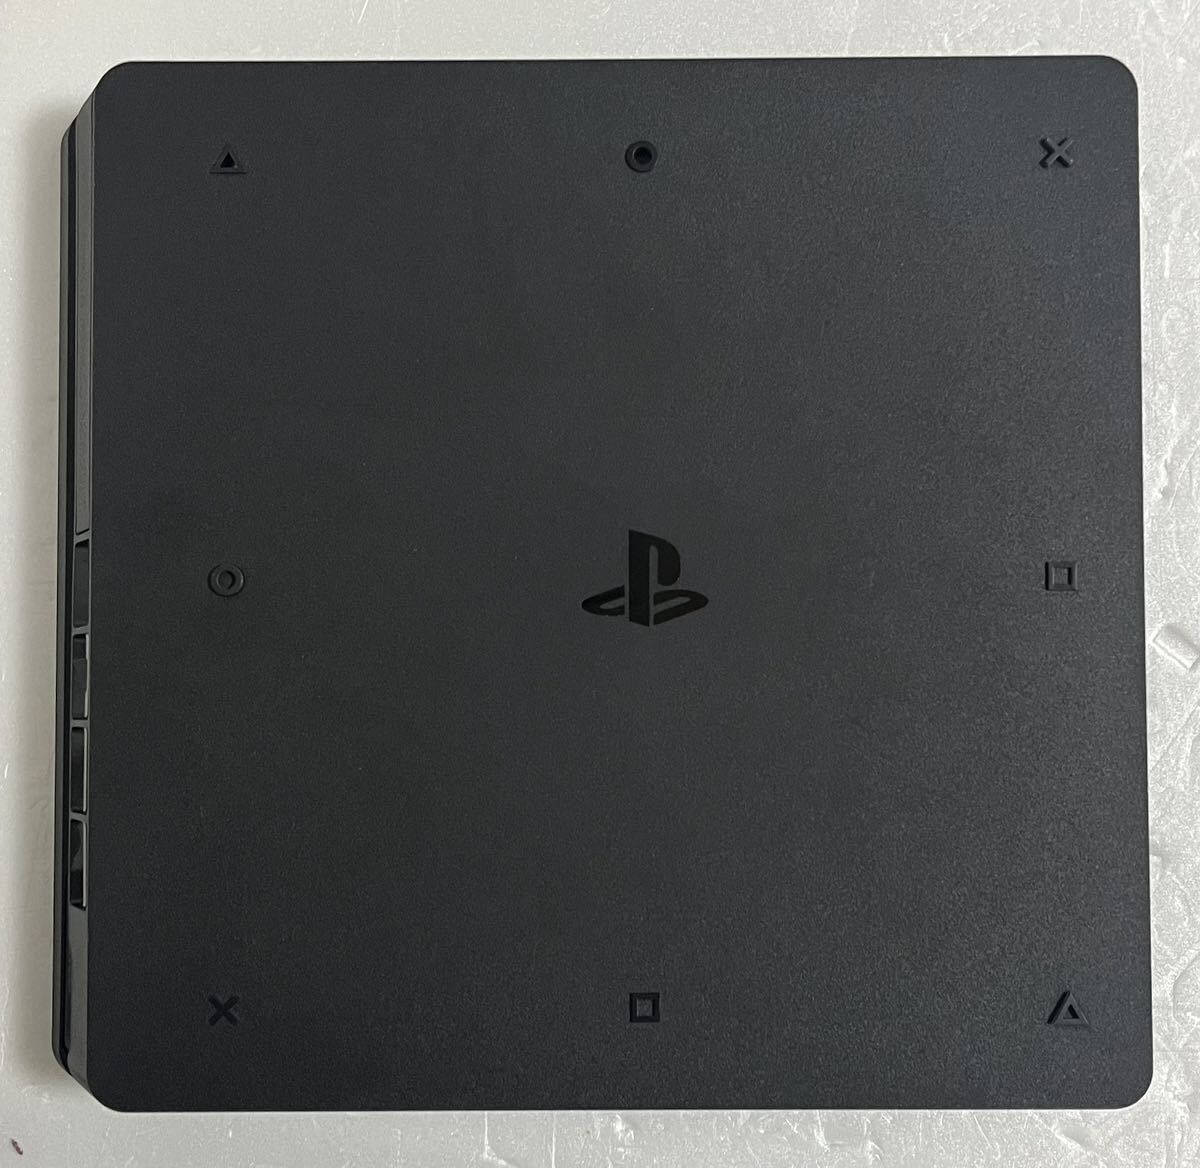 1 jpy start PlayStation 4 thin type SONY 500GB 2 pcs summarize operation excellent goods 